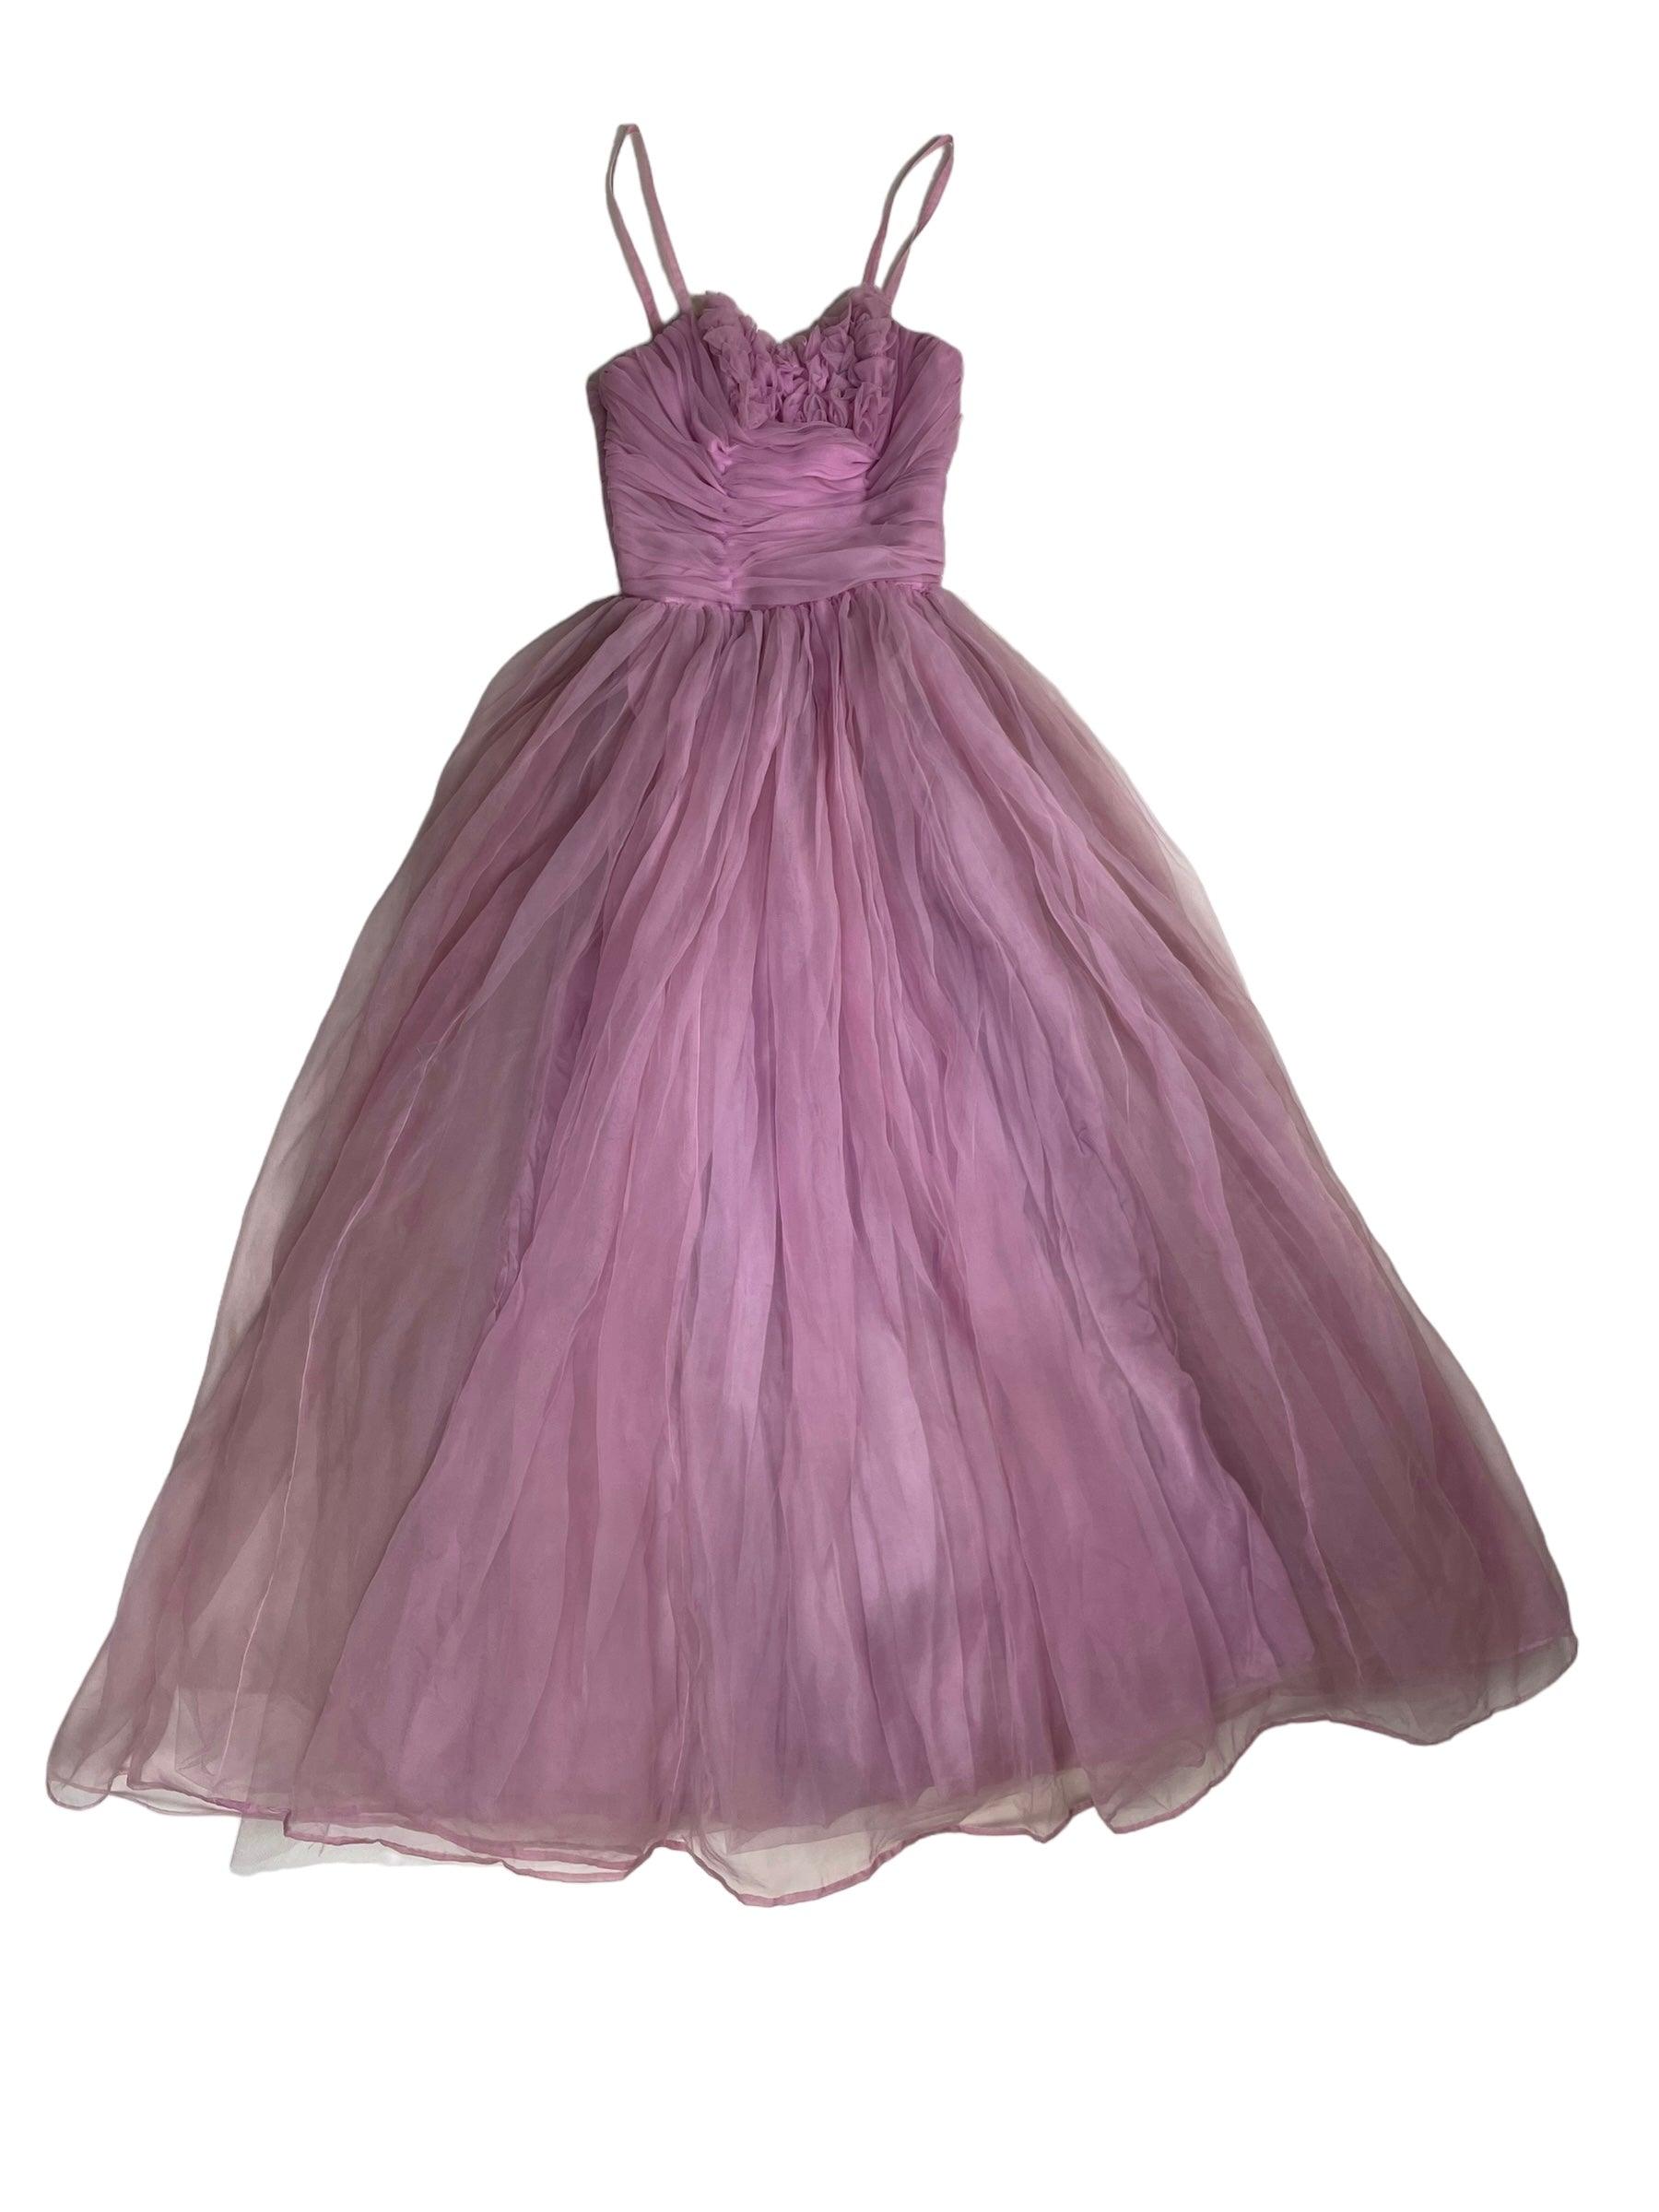 1950s Lee Delman pink tulle gown - Known Source